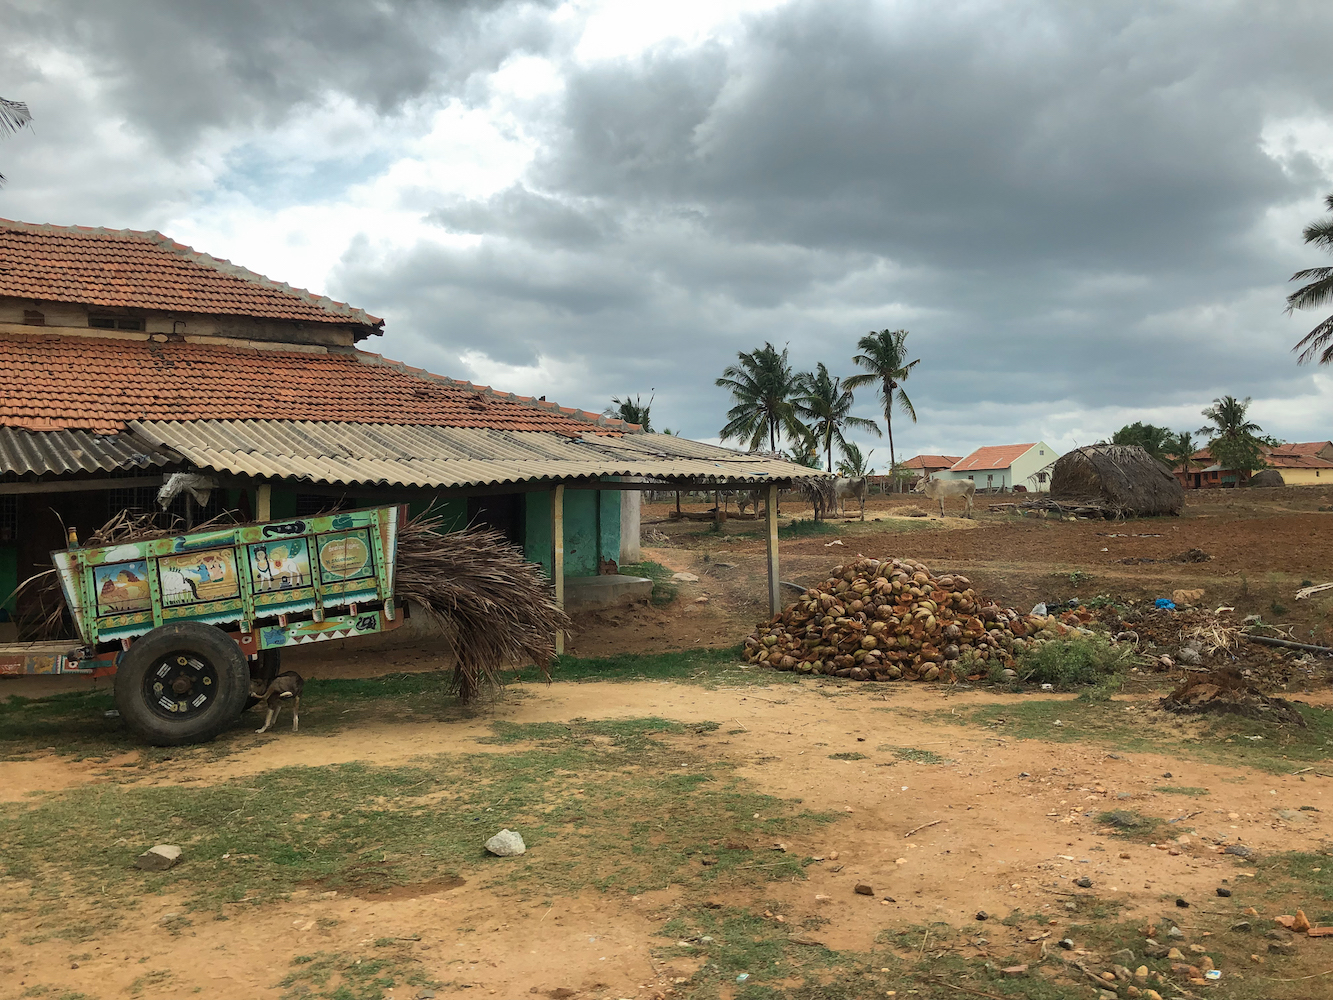 A village house in Channapatna, Karnataka, India, with coconut shells and a colorful wheelbarrow in front.